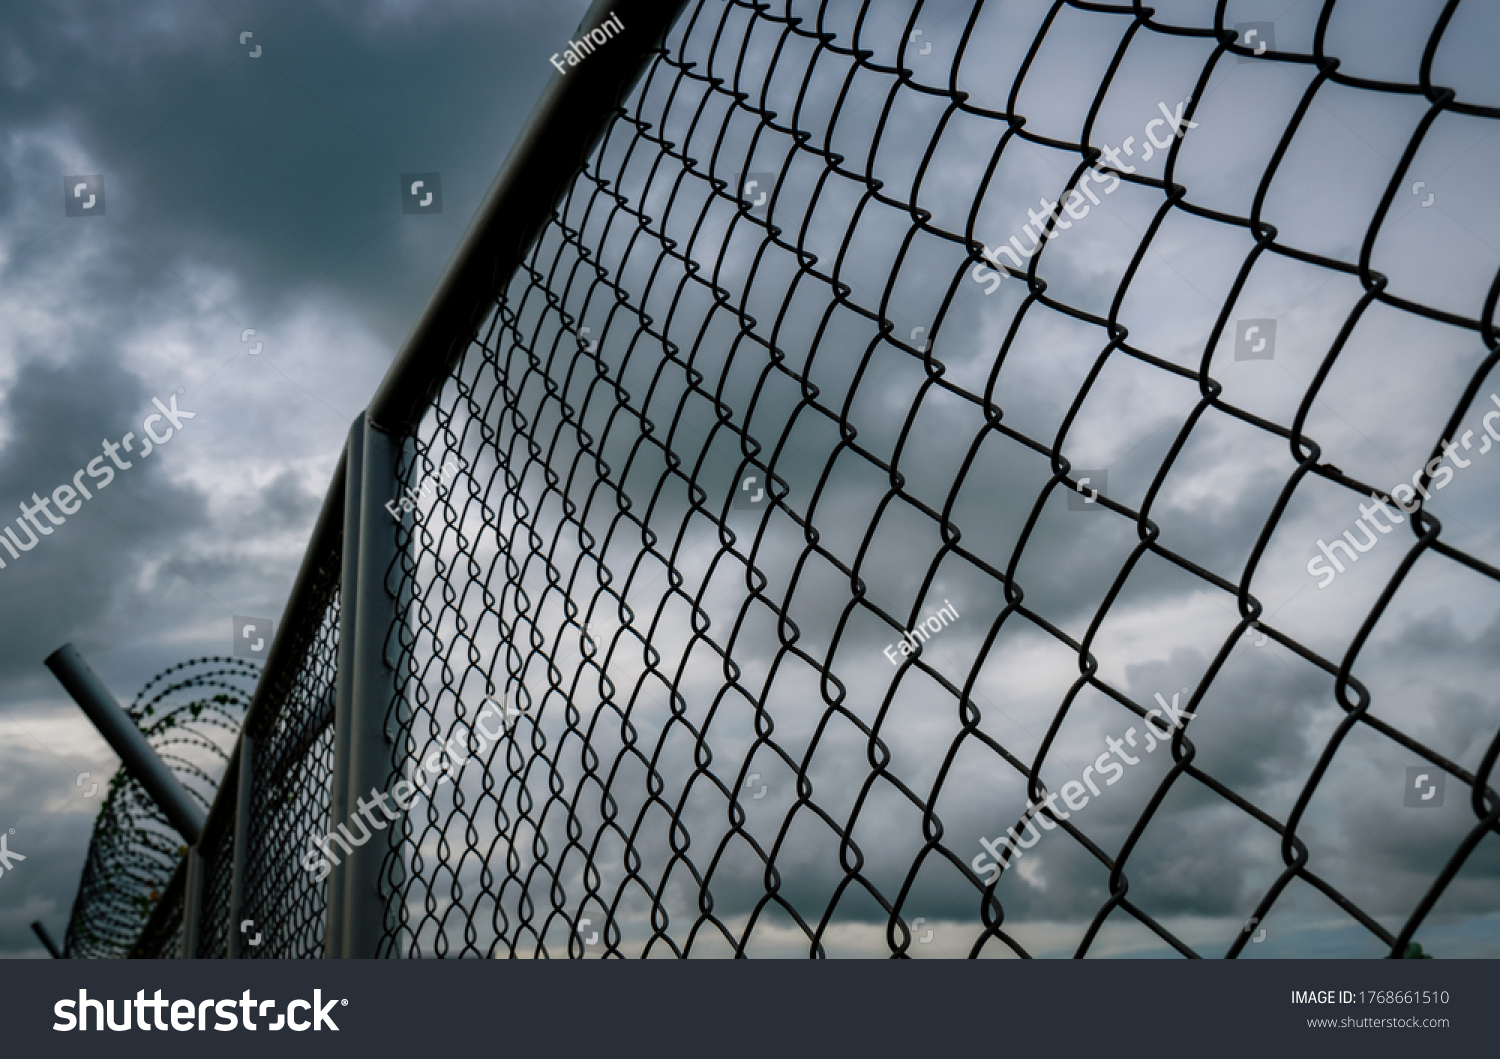 Military zone mesh fence. Prison security fence. Looking up view of barbed wire security fence with storm sky and dark clouds. Razor wire jail fence. Barrier border. Boundary security wall.  #1768661510